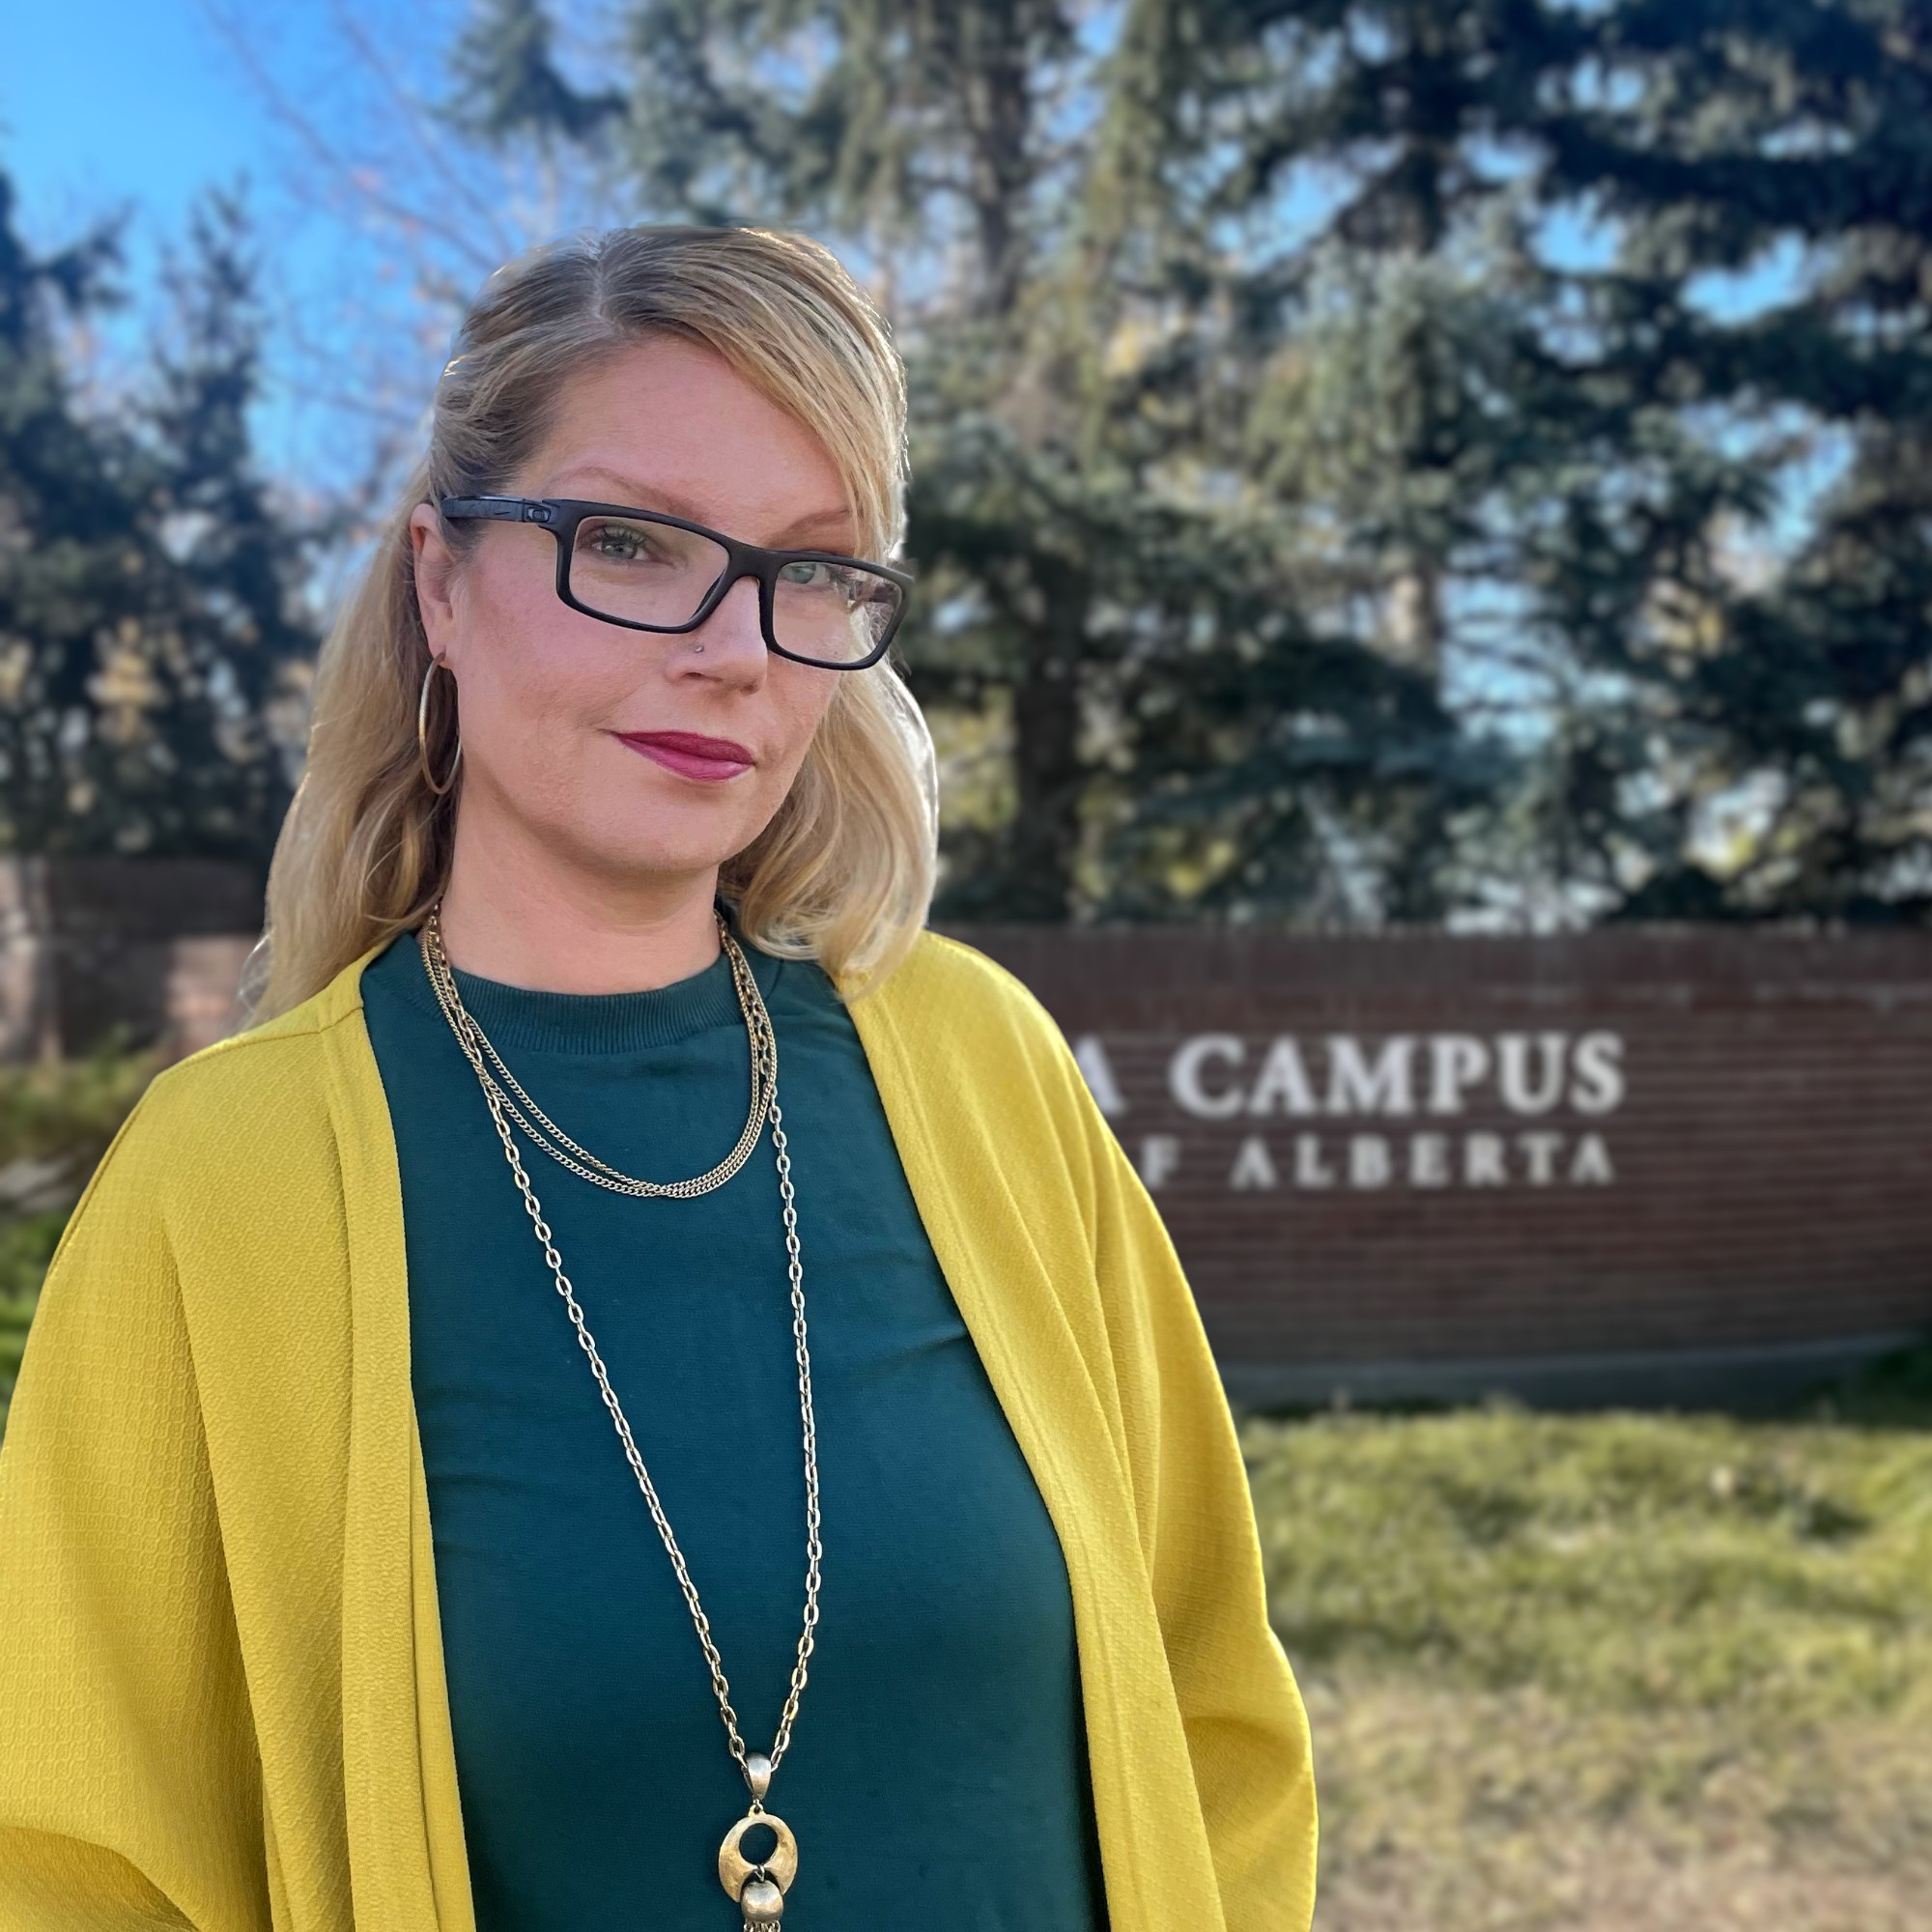 Rebecca Purc-Stephenson is pictured at the U of A's Augustana Campus